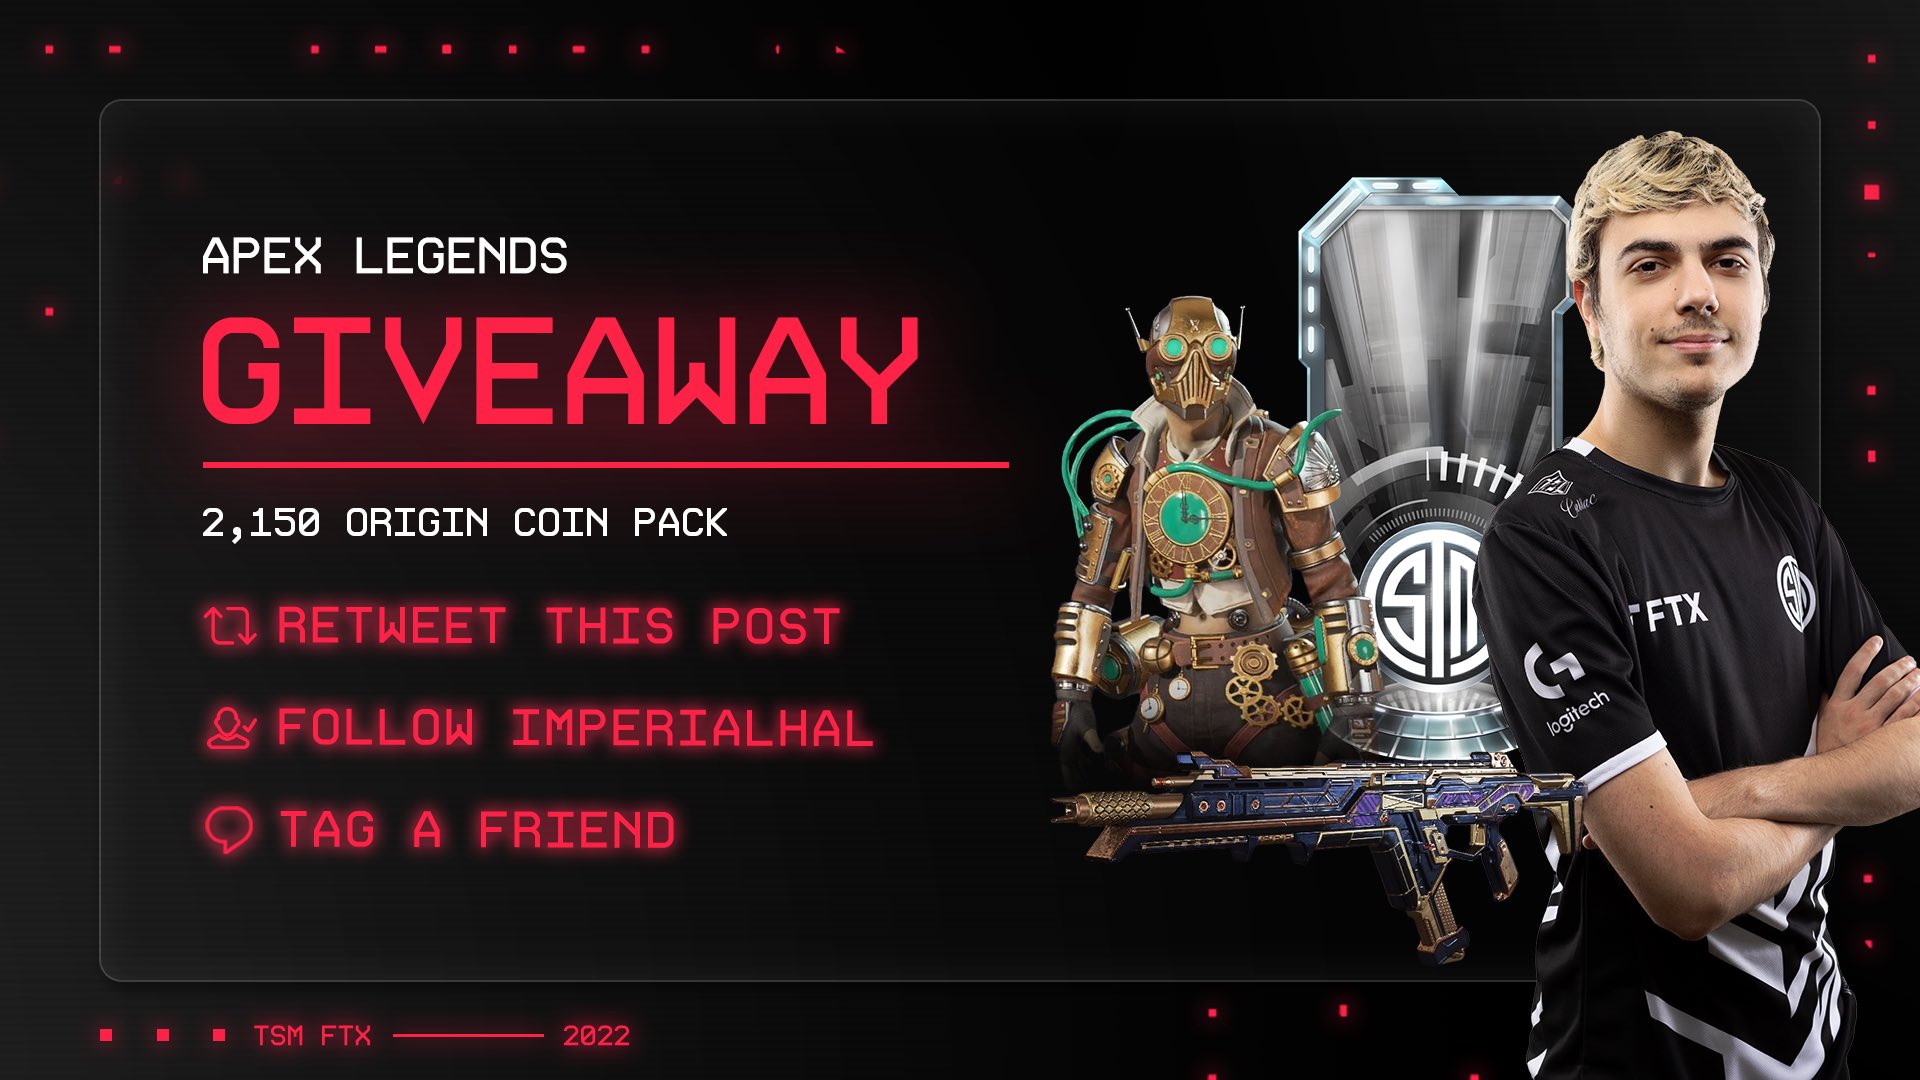 TSM ImperialHal on X: I'm giving away a 2,150 Origin coin pack to